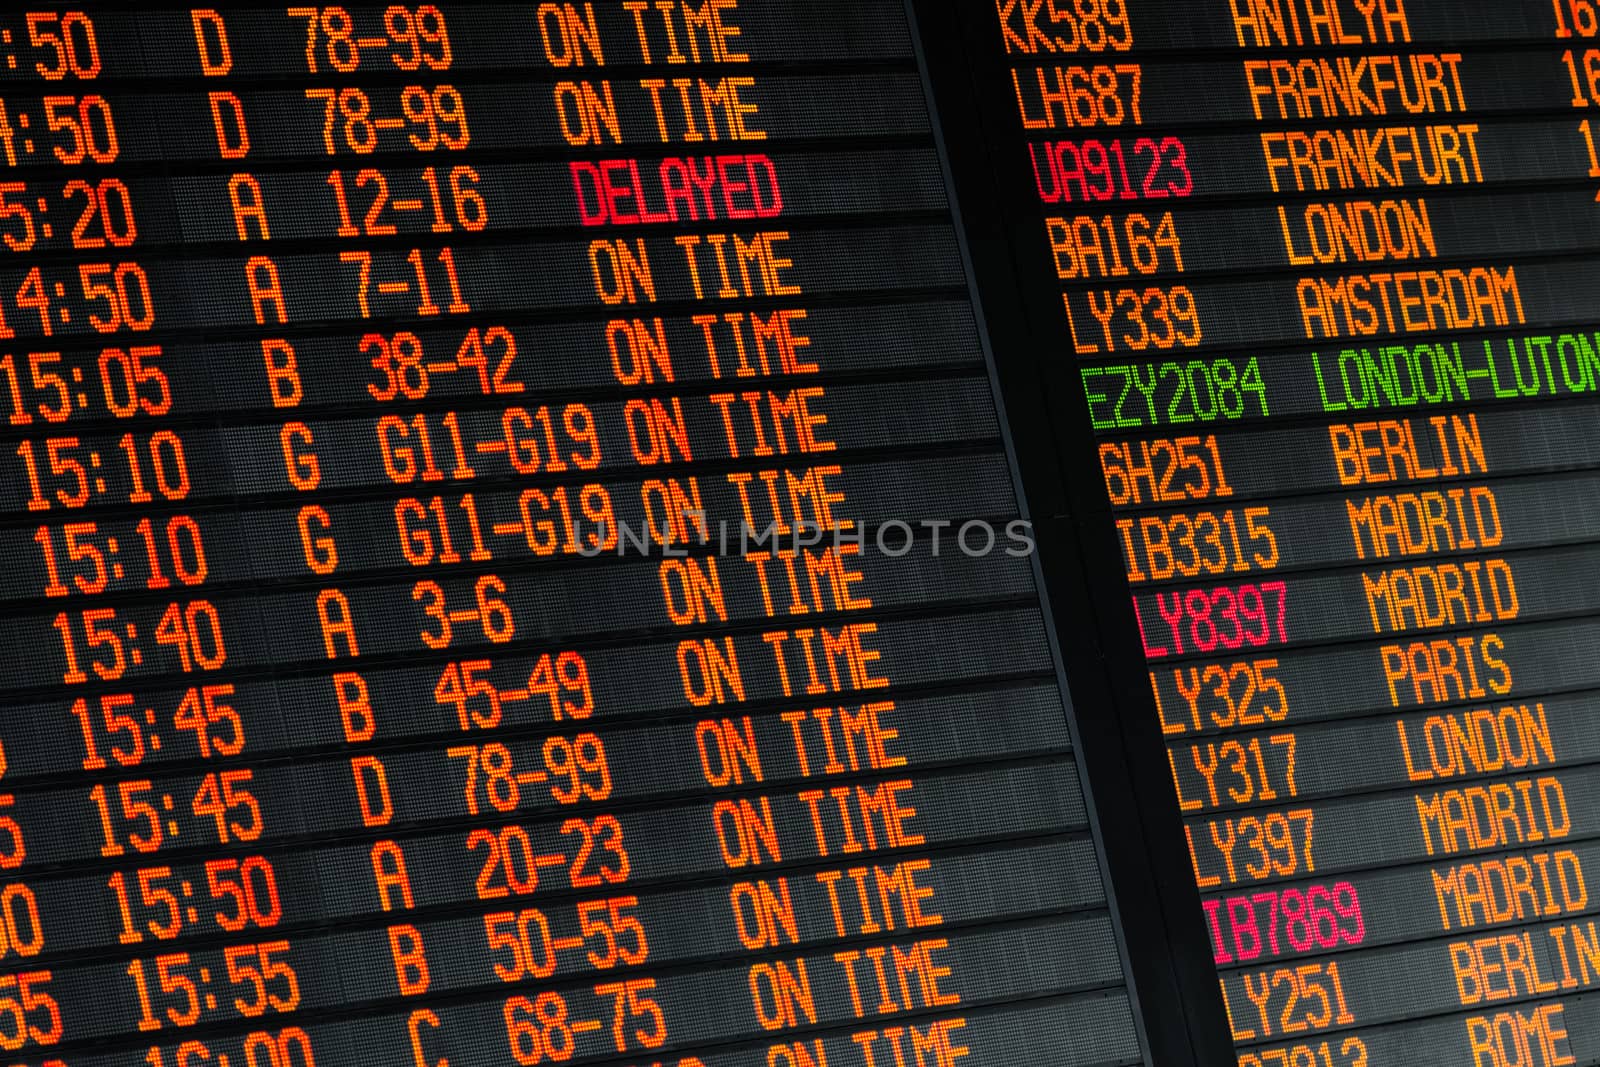 Electronic flights schedule - arrivals and departures information in international airport